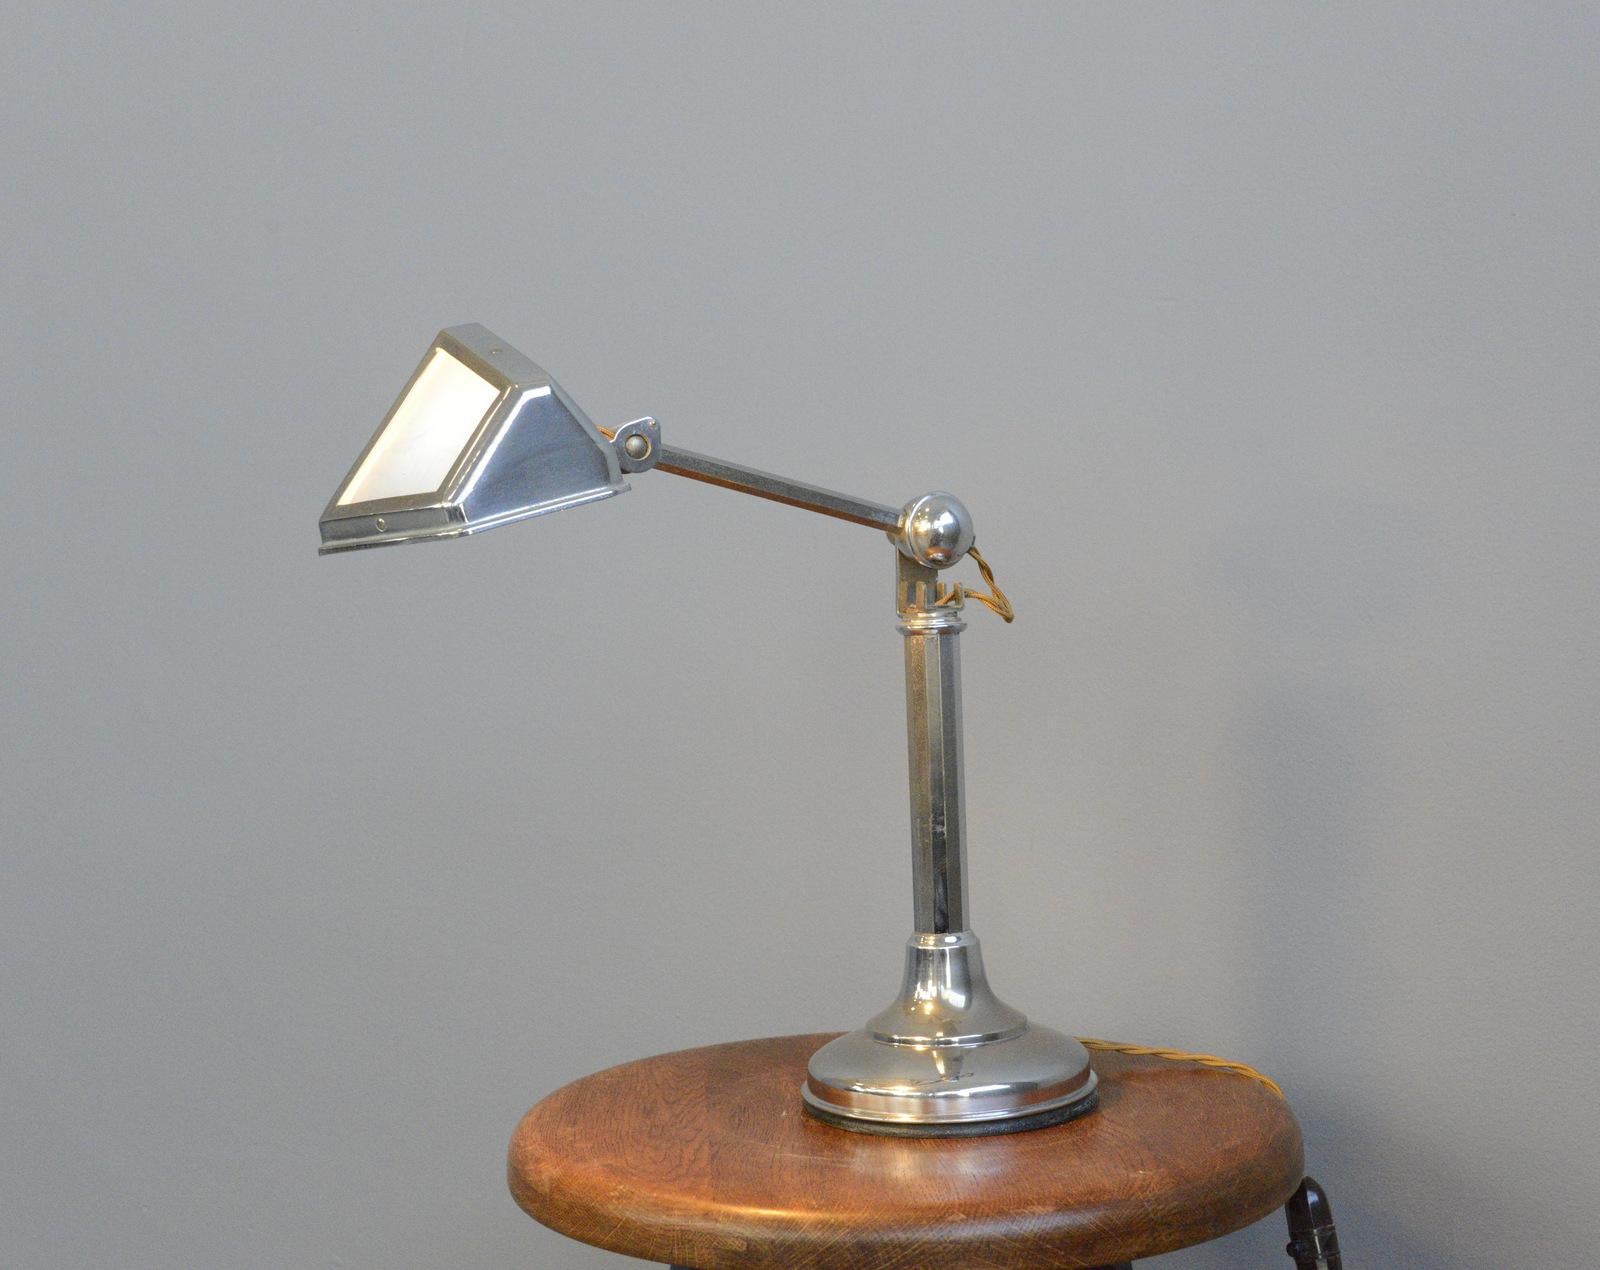 Art Deco desk lamp by Pirouette, circa 1930.

- Chrome base and arm
- Original Art Deco Bakelite on/off switch
- Takes E14 fitting bulbs
- Opaline glass diffuser
- French, circa 1930
- Measures: 30 cm wide x 16 cm deep x 46 cm